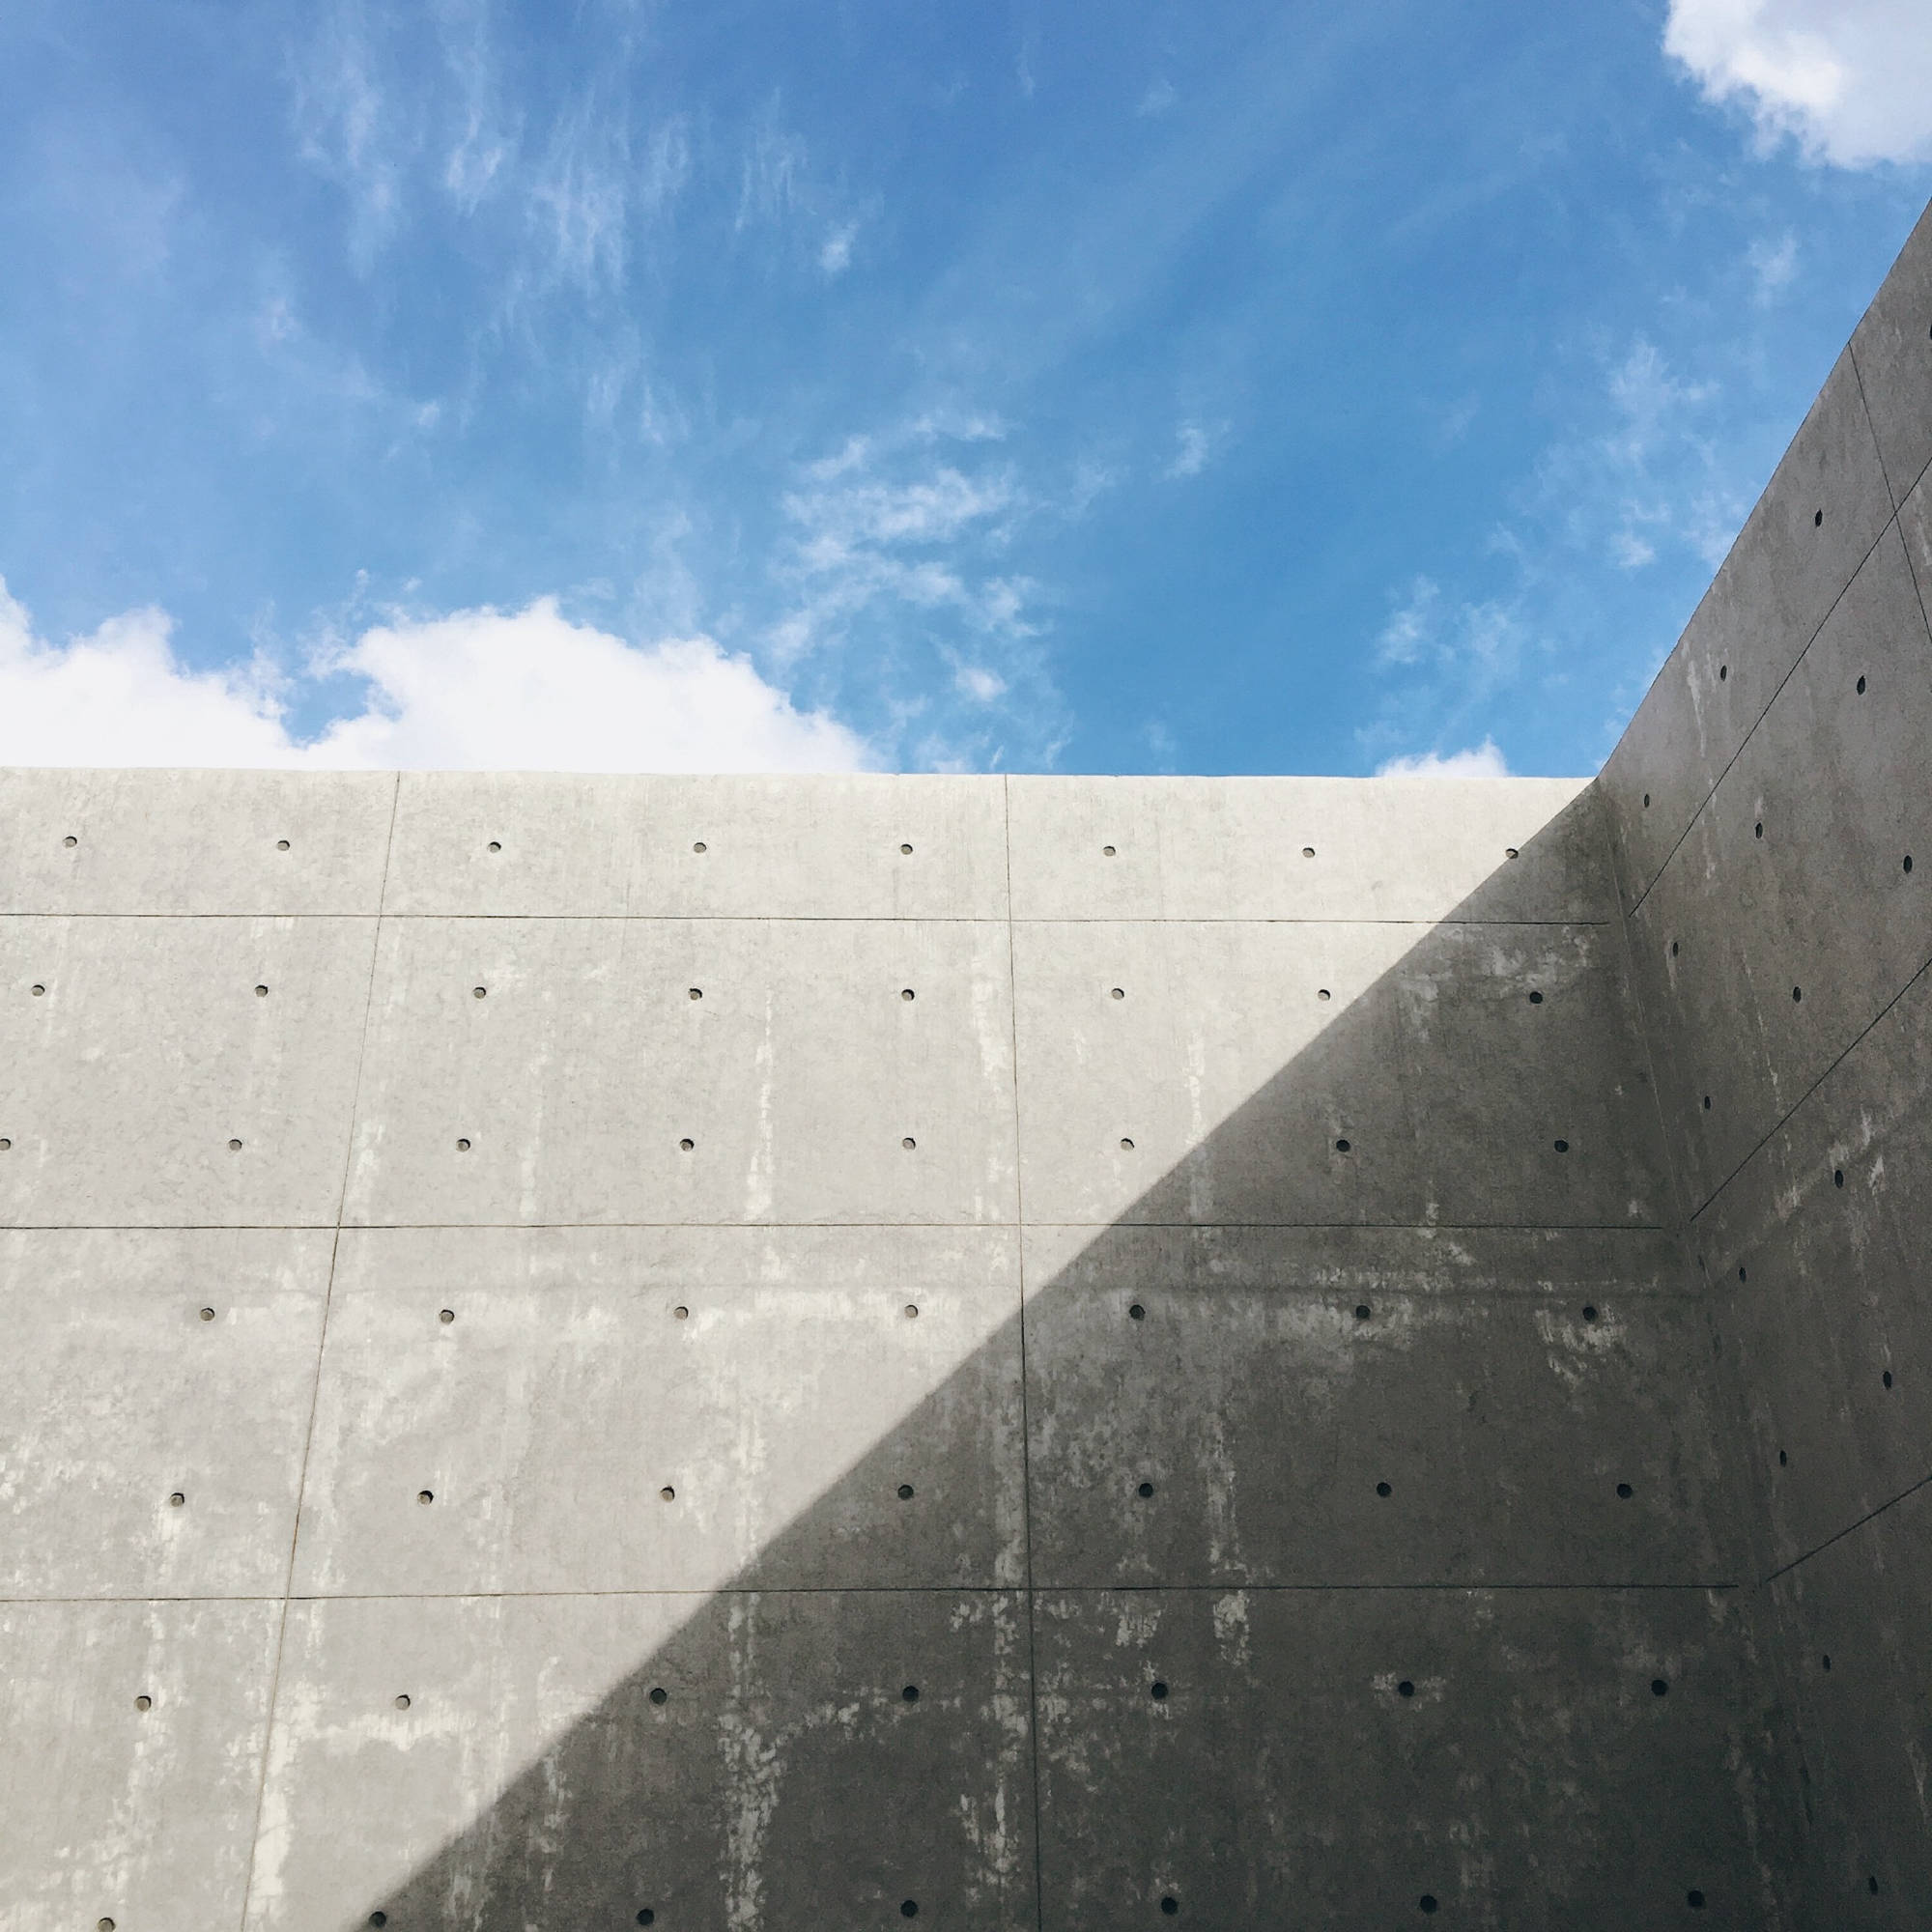 High concrete wall with blue cloudy sky peeking above